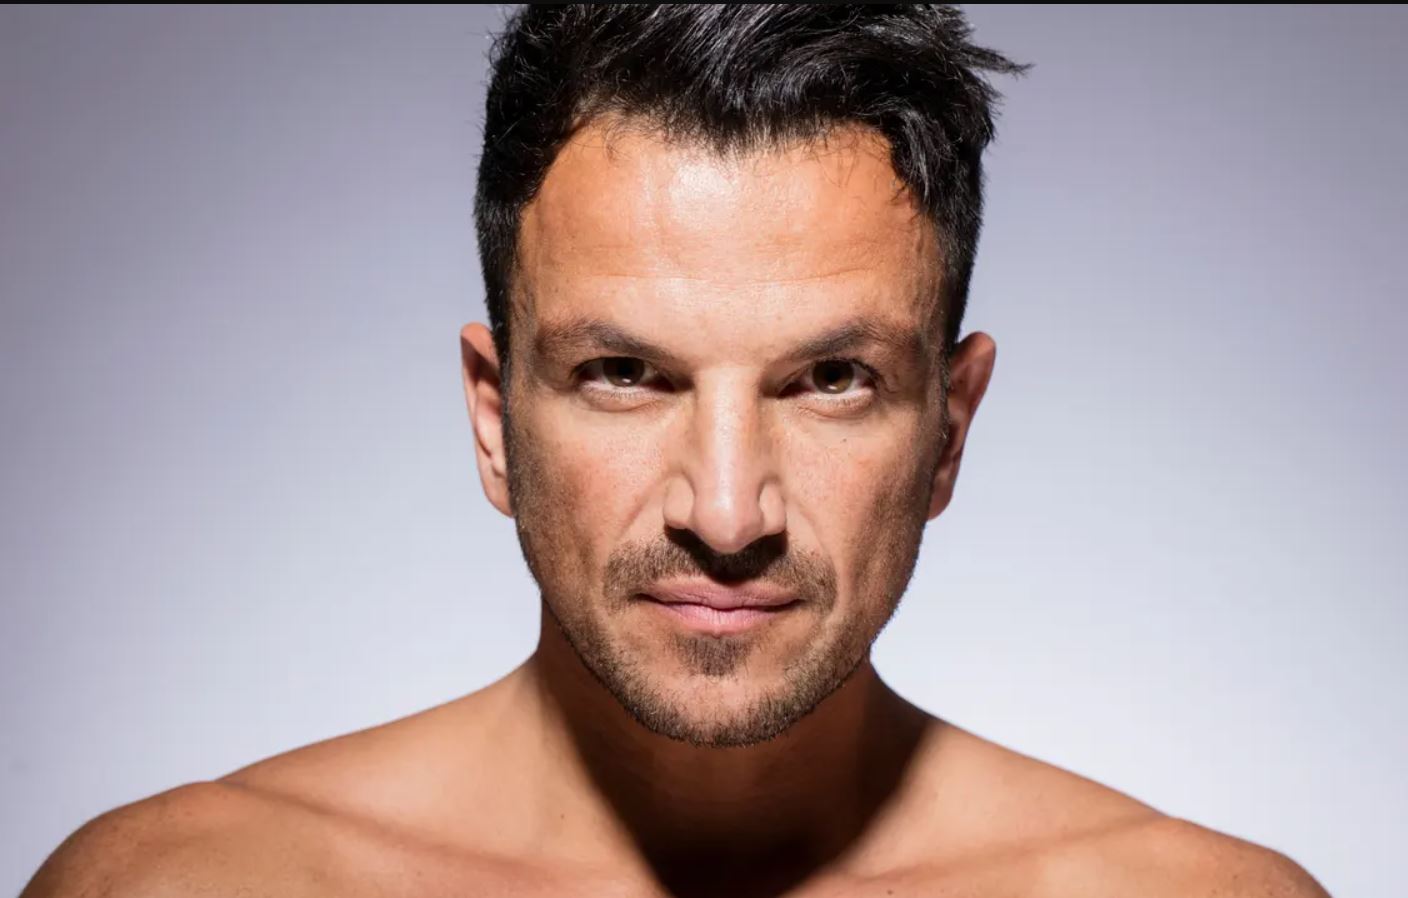 Peter Andre Phone Number, Fanmail Address and Contact Details